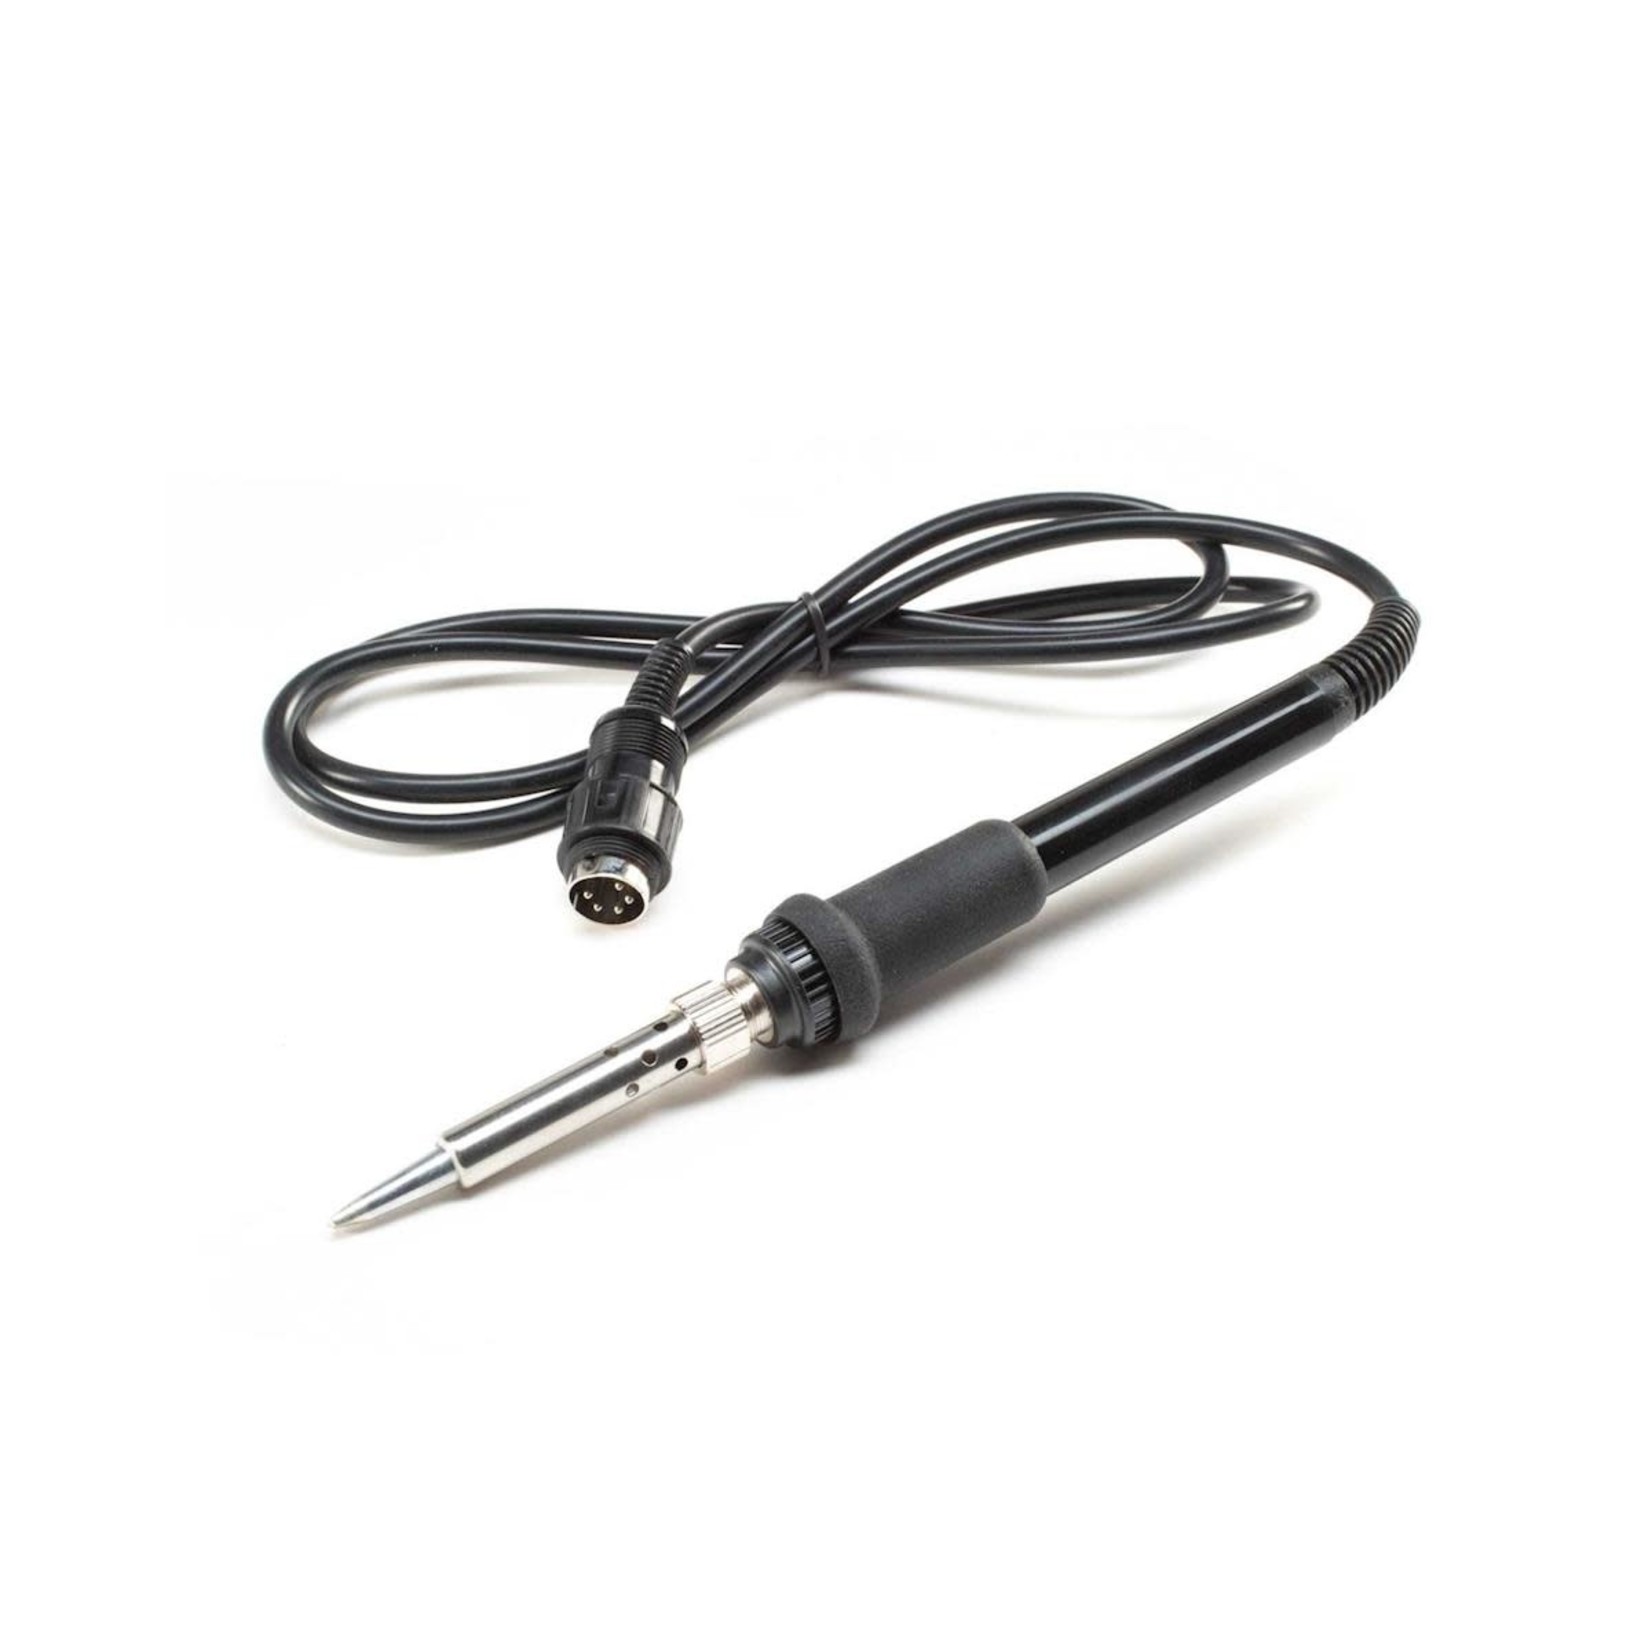 Duratrax DuraTrax TrakPower Replacement 908 Iron for TK950 Soldering Station #DTXR0960